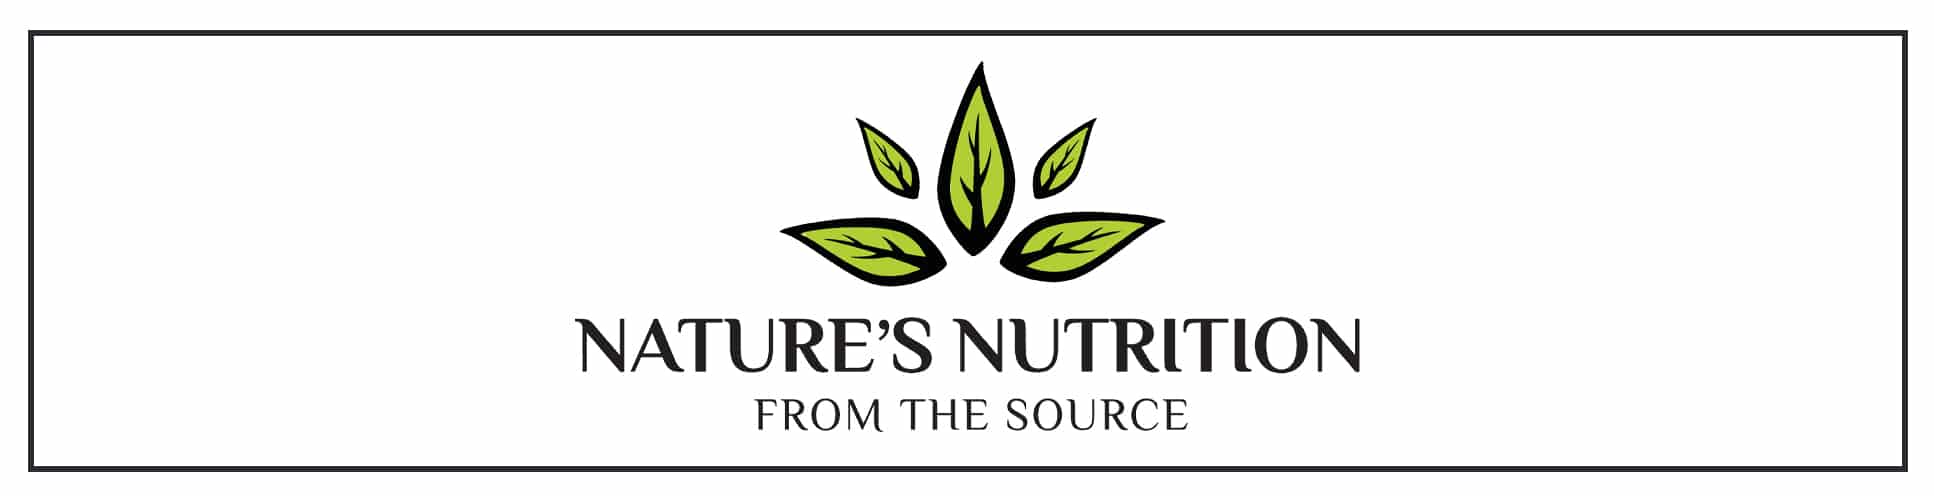 A logo for nature's nutrition from the source.